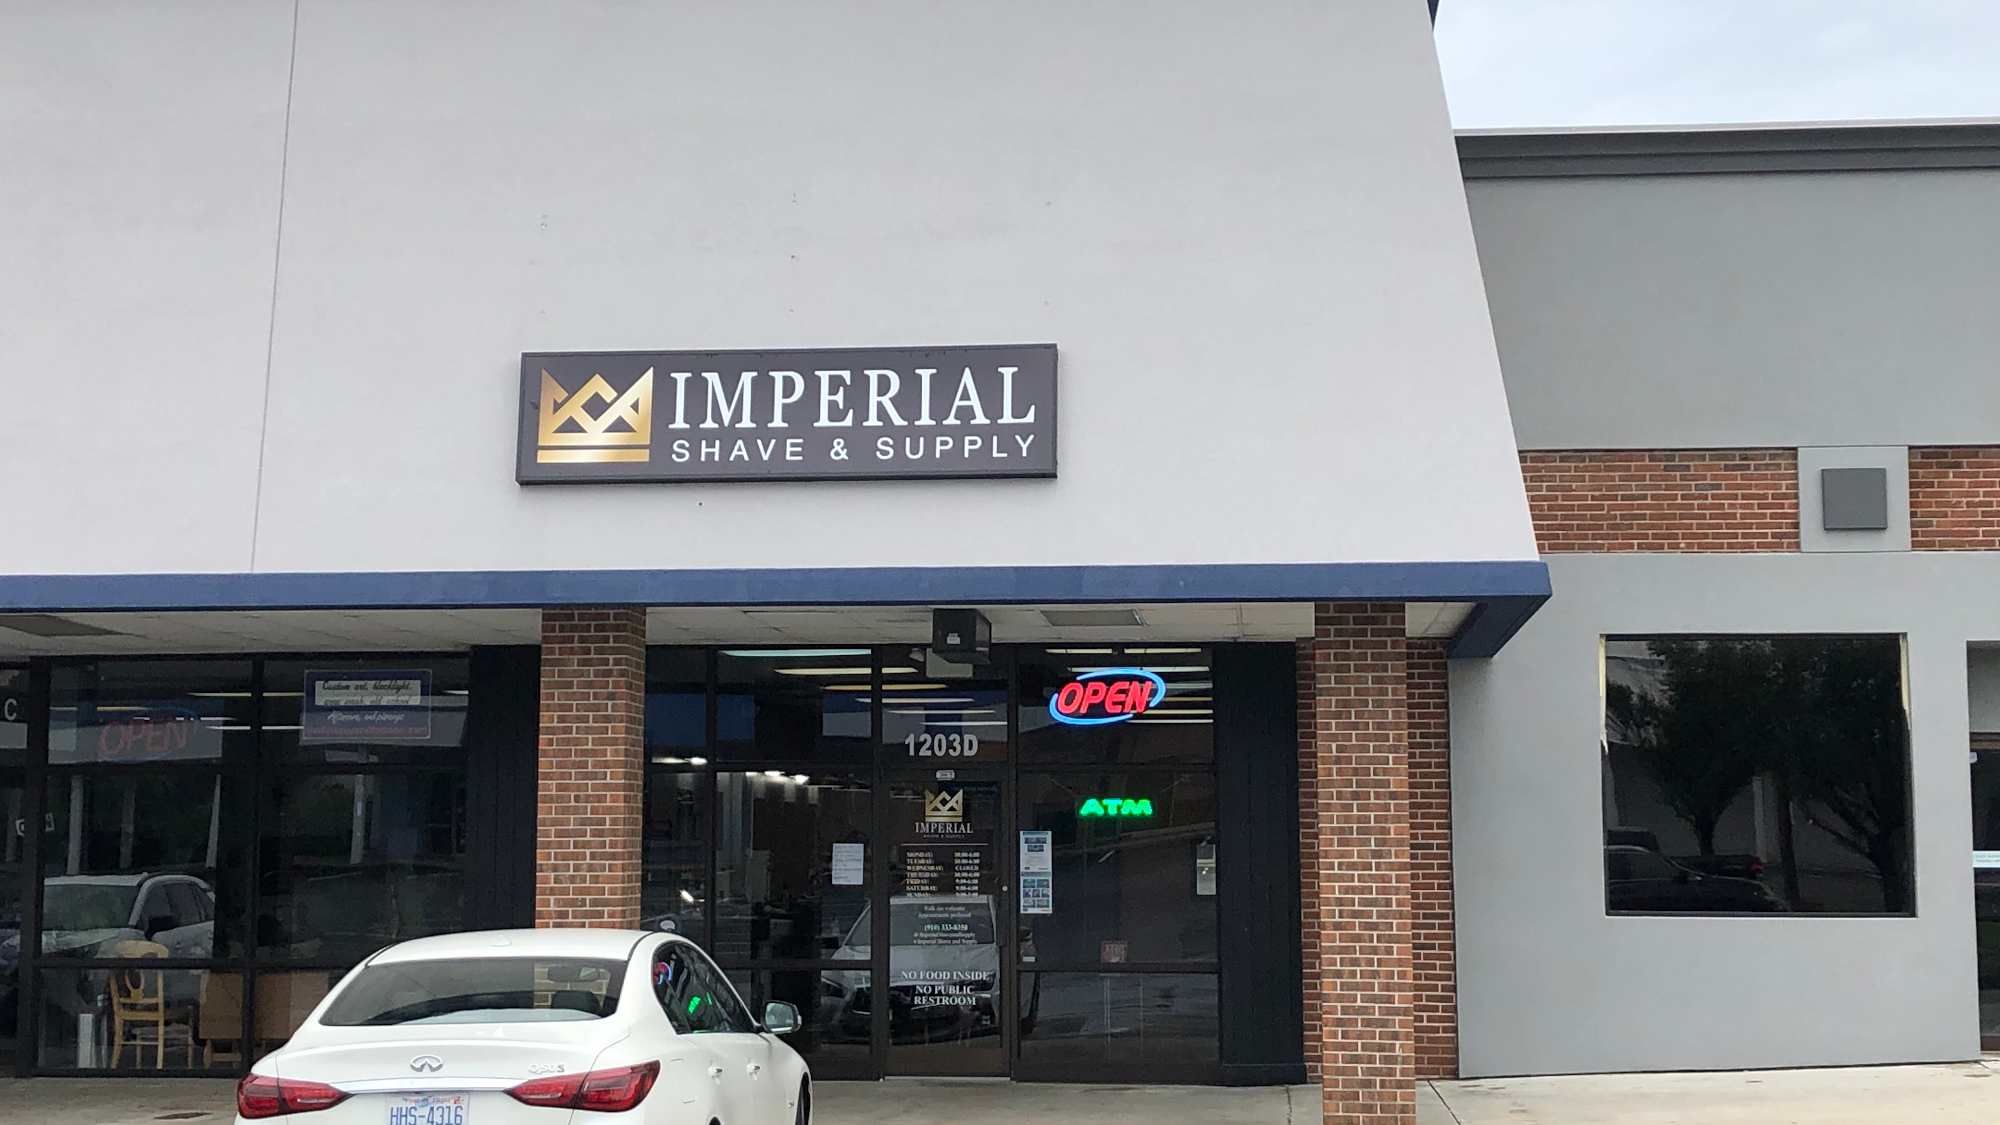 Imperial Shave & Supply